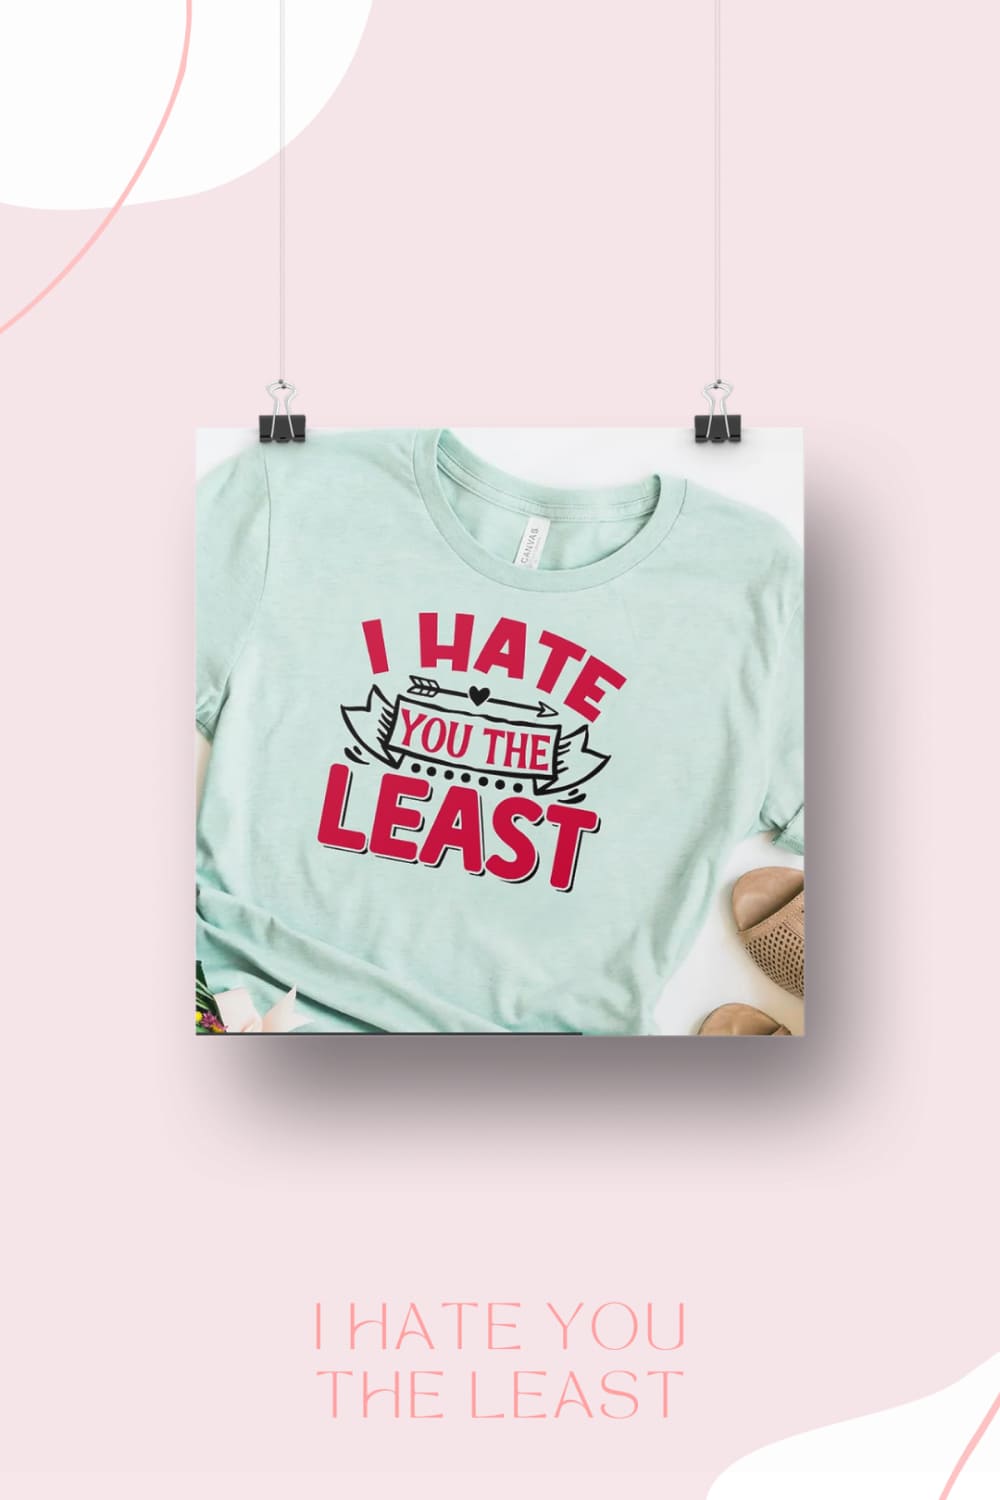 I hate you the least - pinterest image preview.